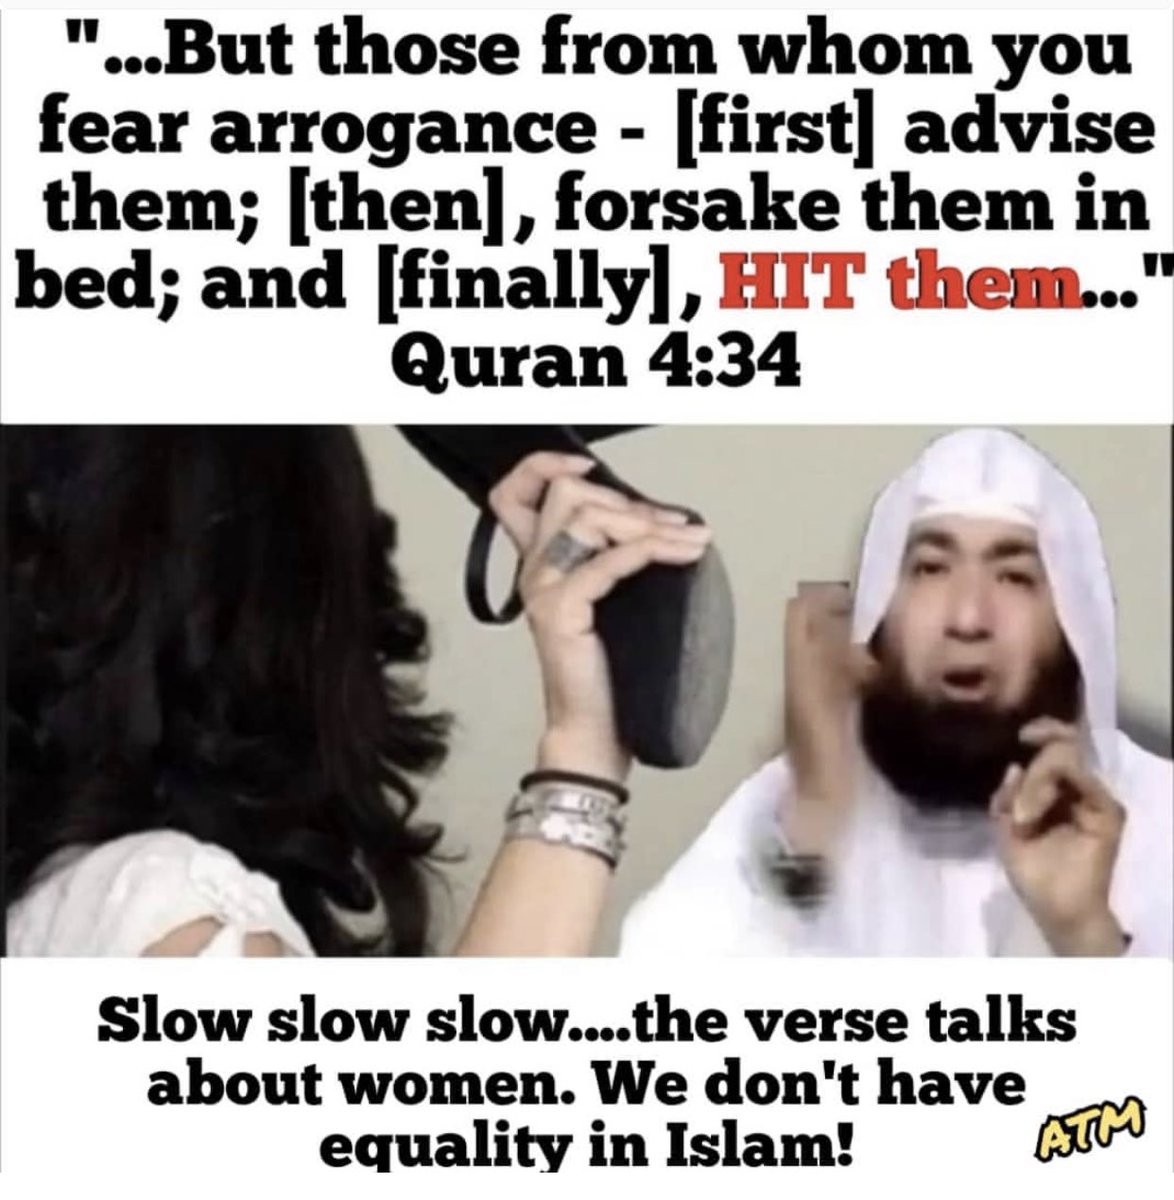 It is hard to get facts about women rights before Islam. Islamic scholars distorted many facts about Arabians before Islam. For history is written by the winners. But we do know something about women's rights BEFORE ISLAM from the story of Khadijah, Muhammad's first wife.…